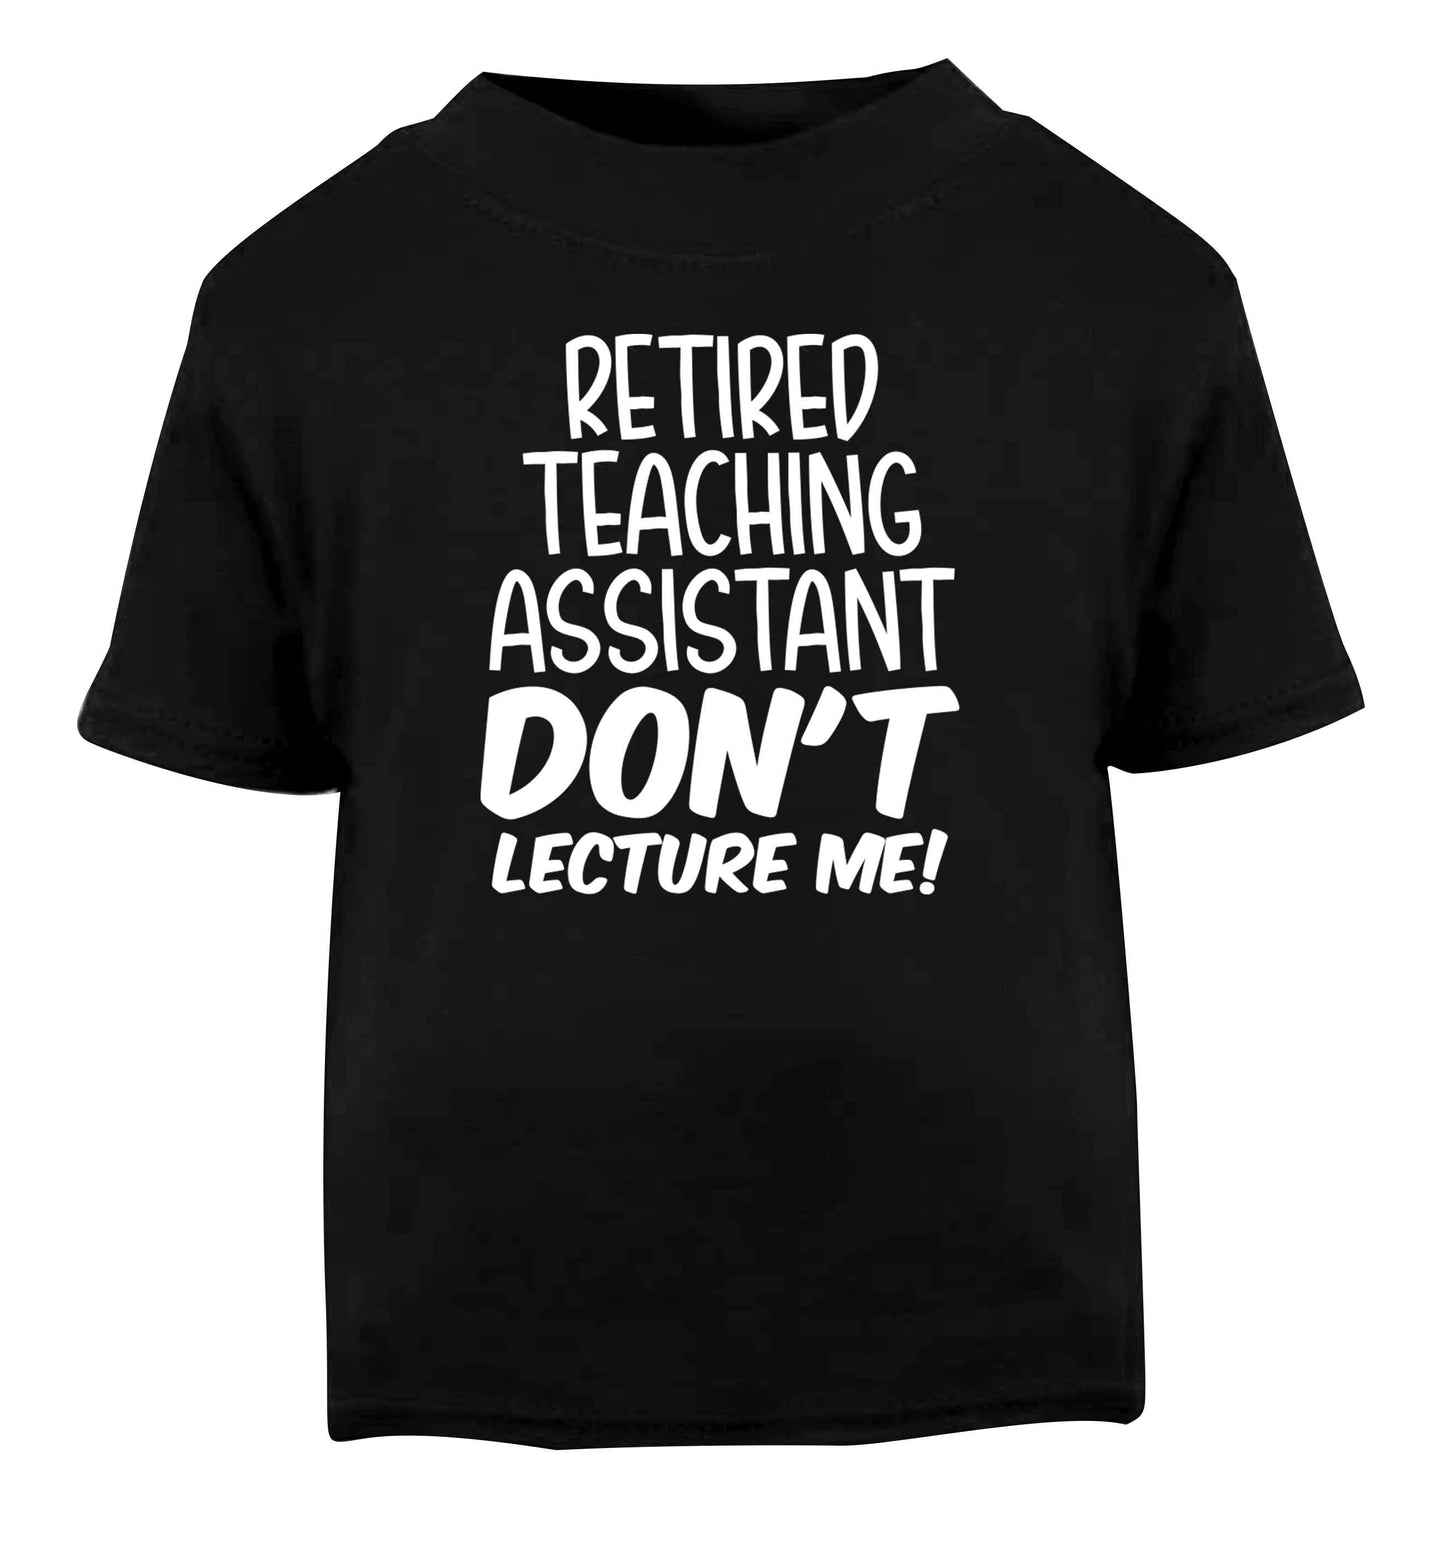 Retired teaching assistant don't lecture me Black Baby Toddler Tshirt 2 years